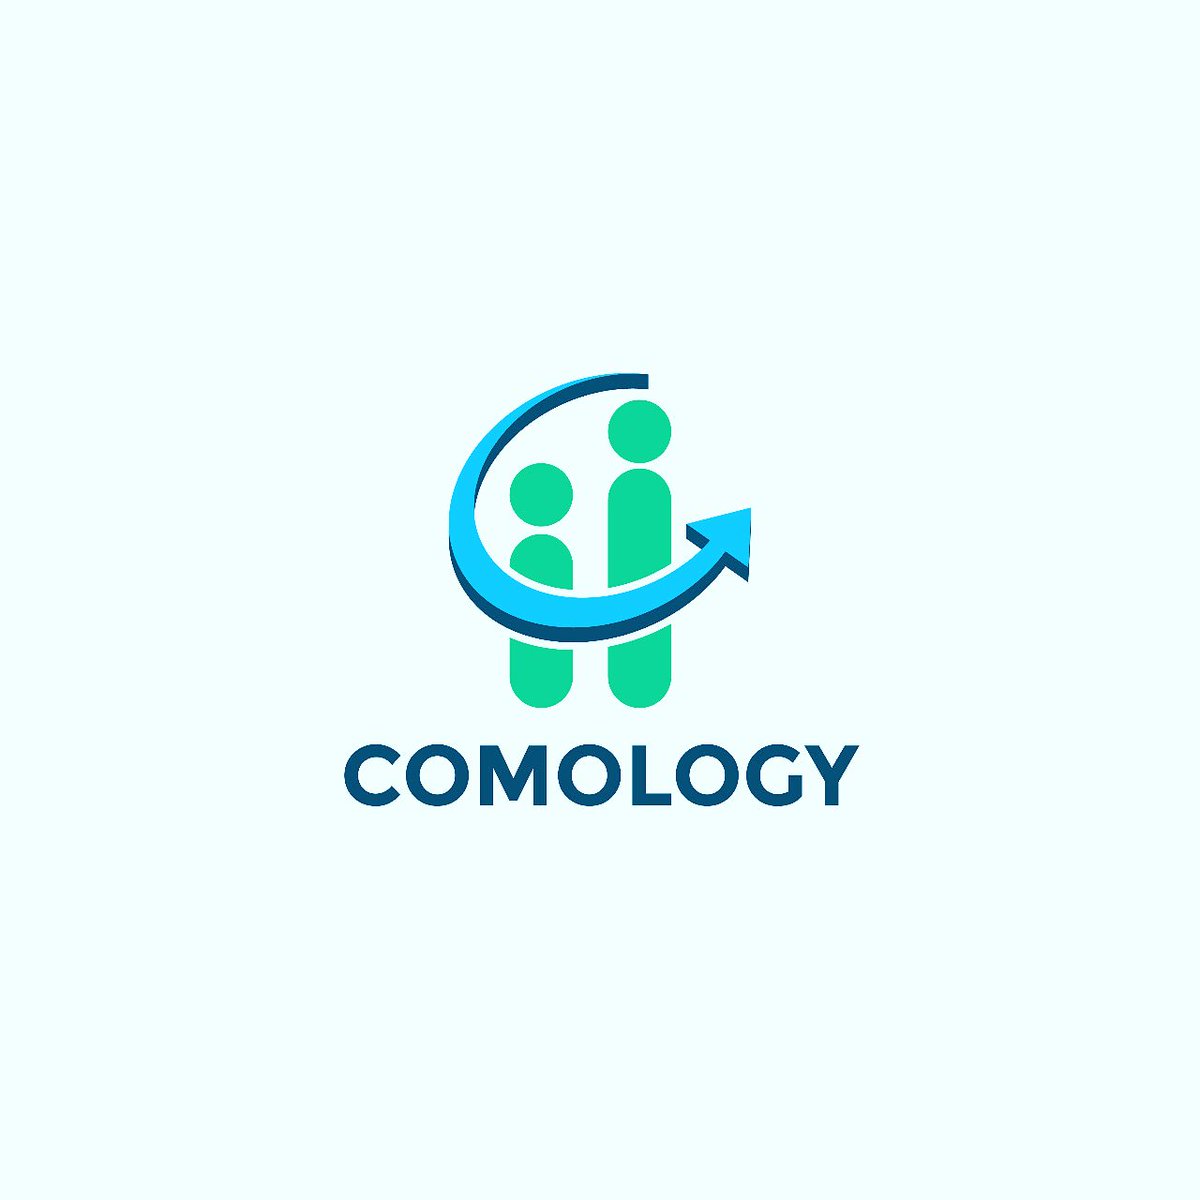 Visit comology.in For #commerce #coaching  in #southkolkata classes from #higherschool 10+2 #graduation #BCOM #CA #CMA #CS